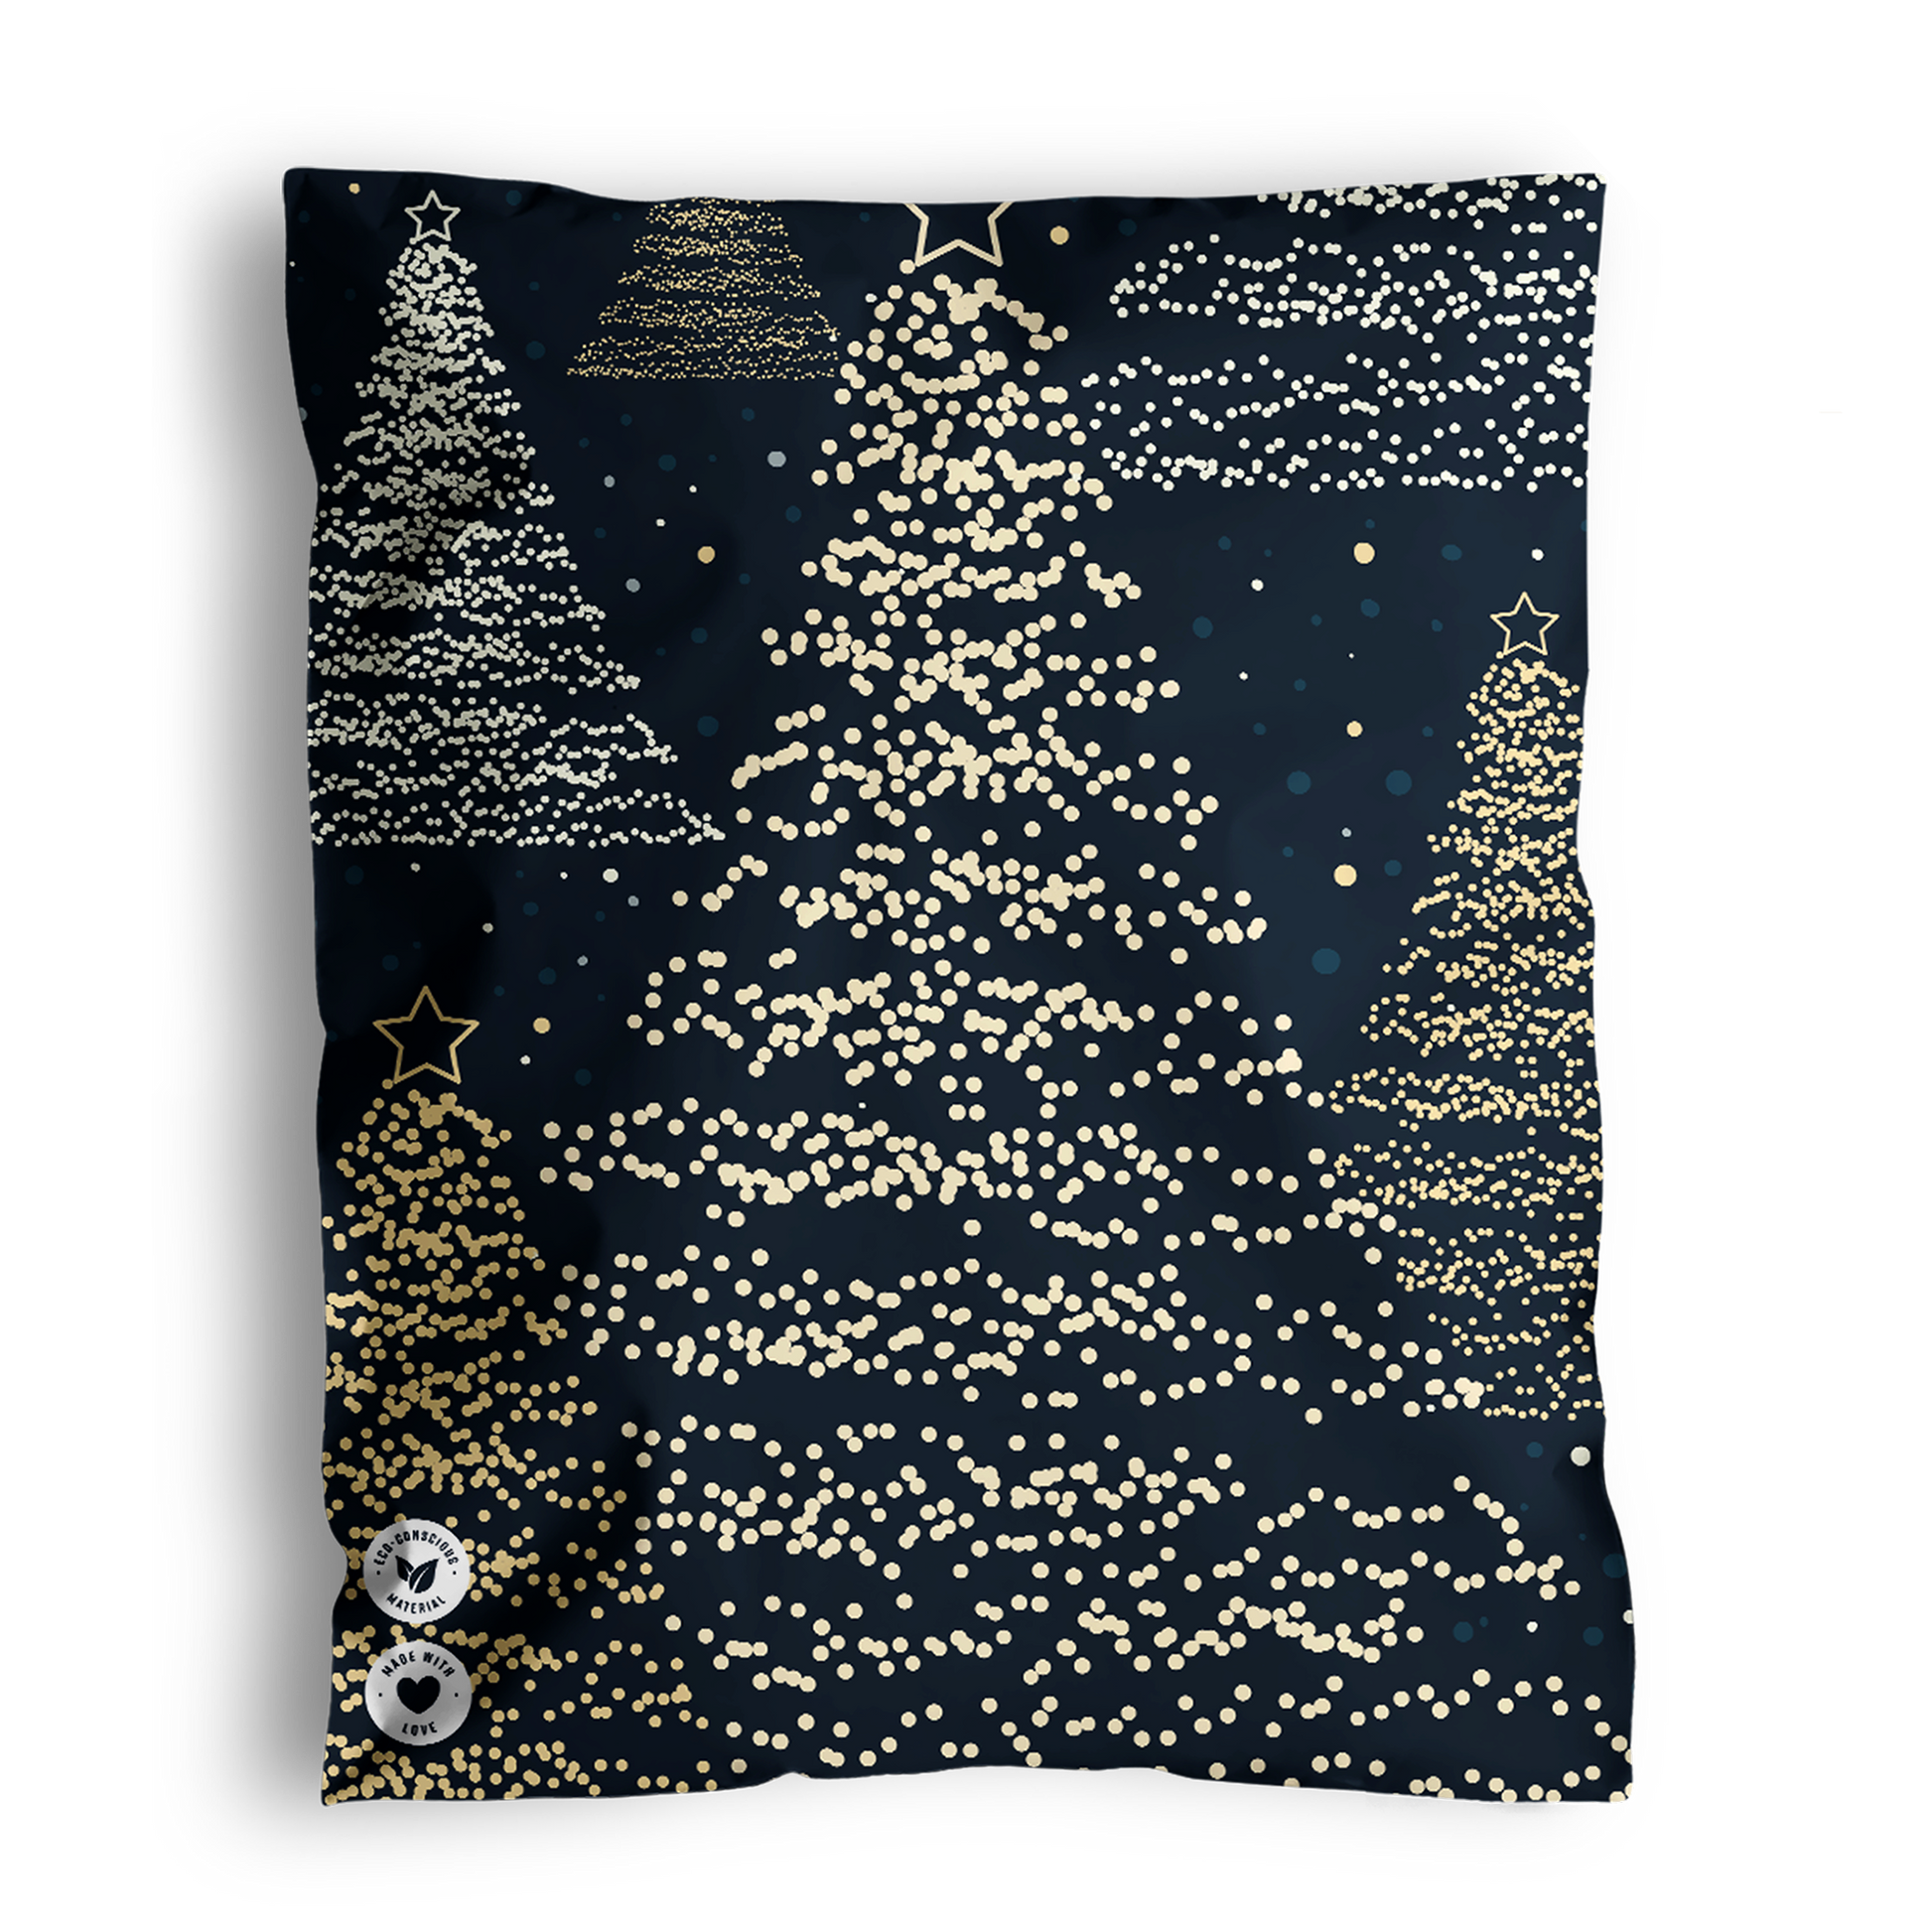 A festive holiday-themed print with stylized Christmas trees and eco-friendly Impack.co packaging patterns on a dark background.